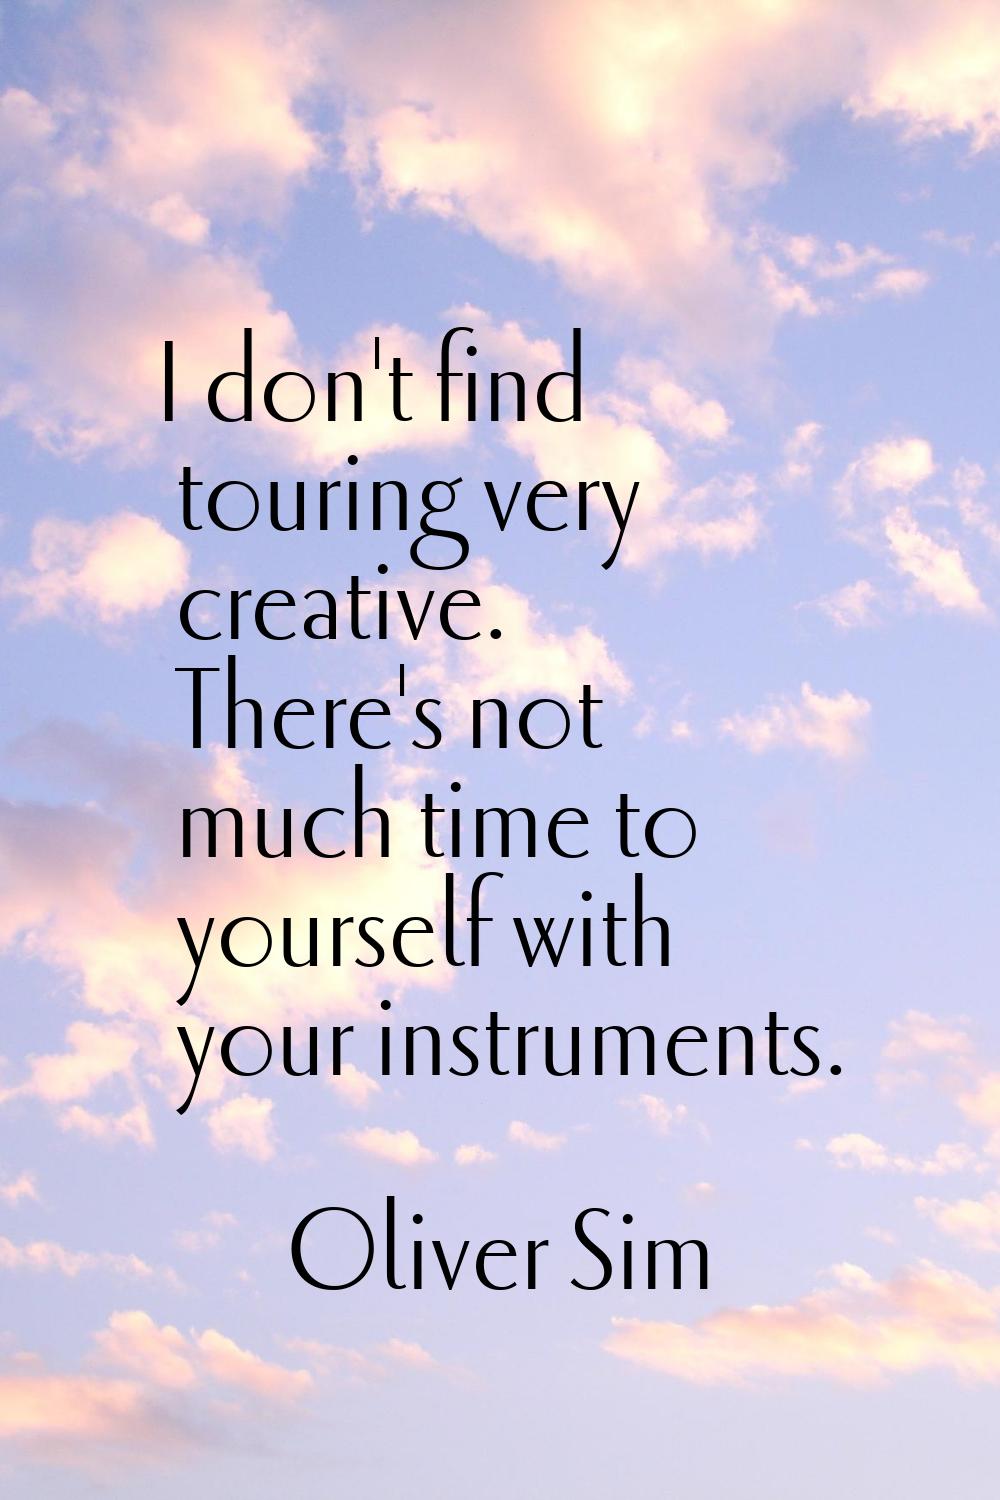 I don't find touring very creative. There's not much time to yourself with your instruments.